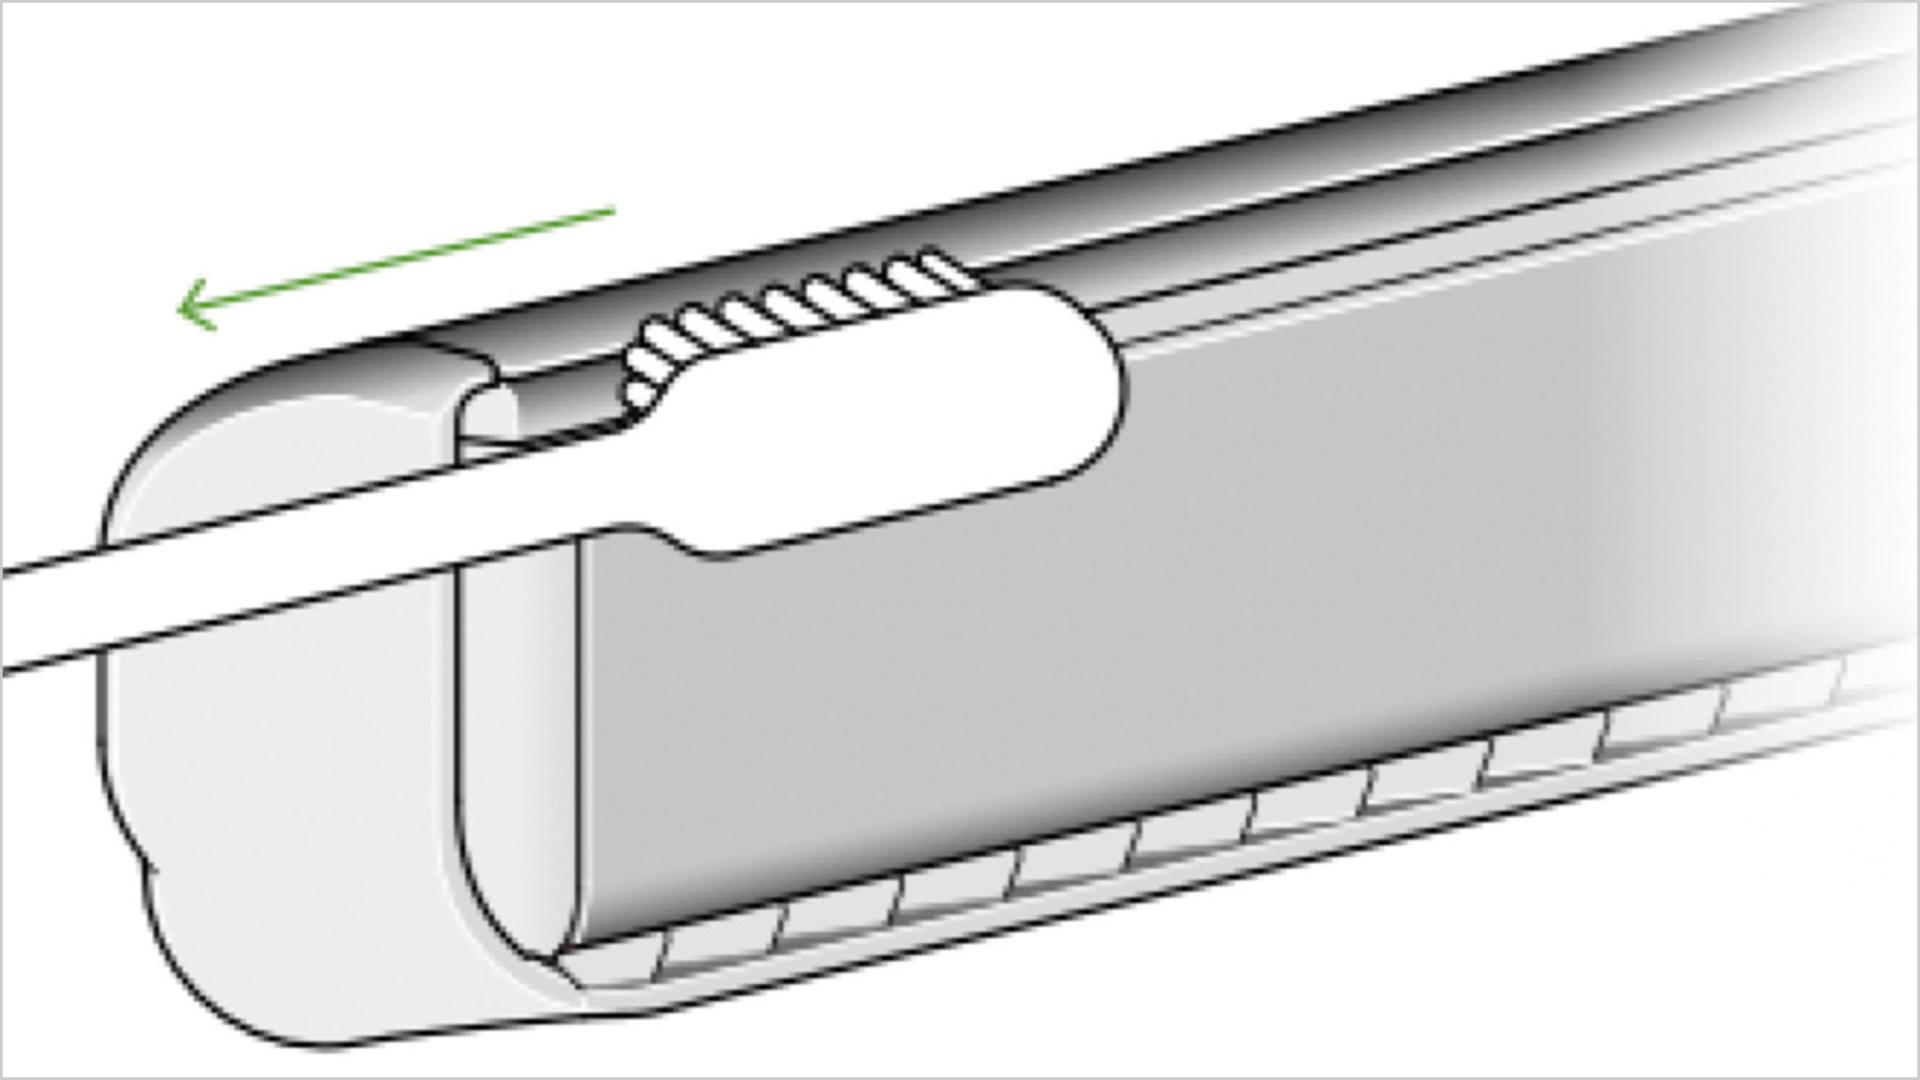 Illustration of tension bars being cleaned with a toothbrush.